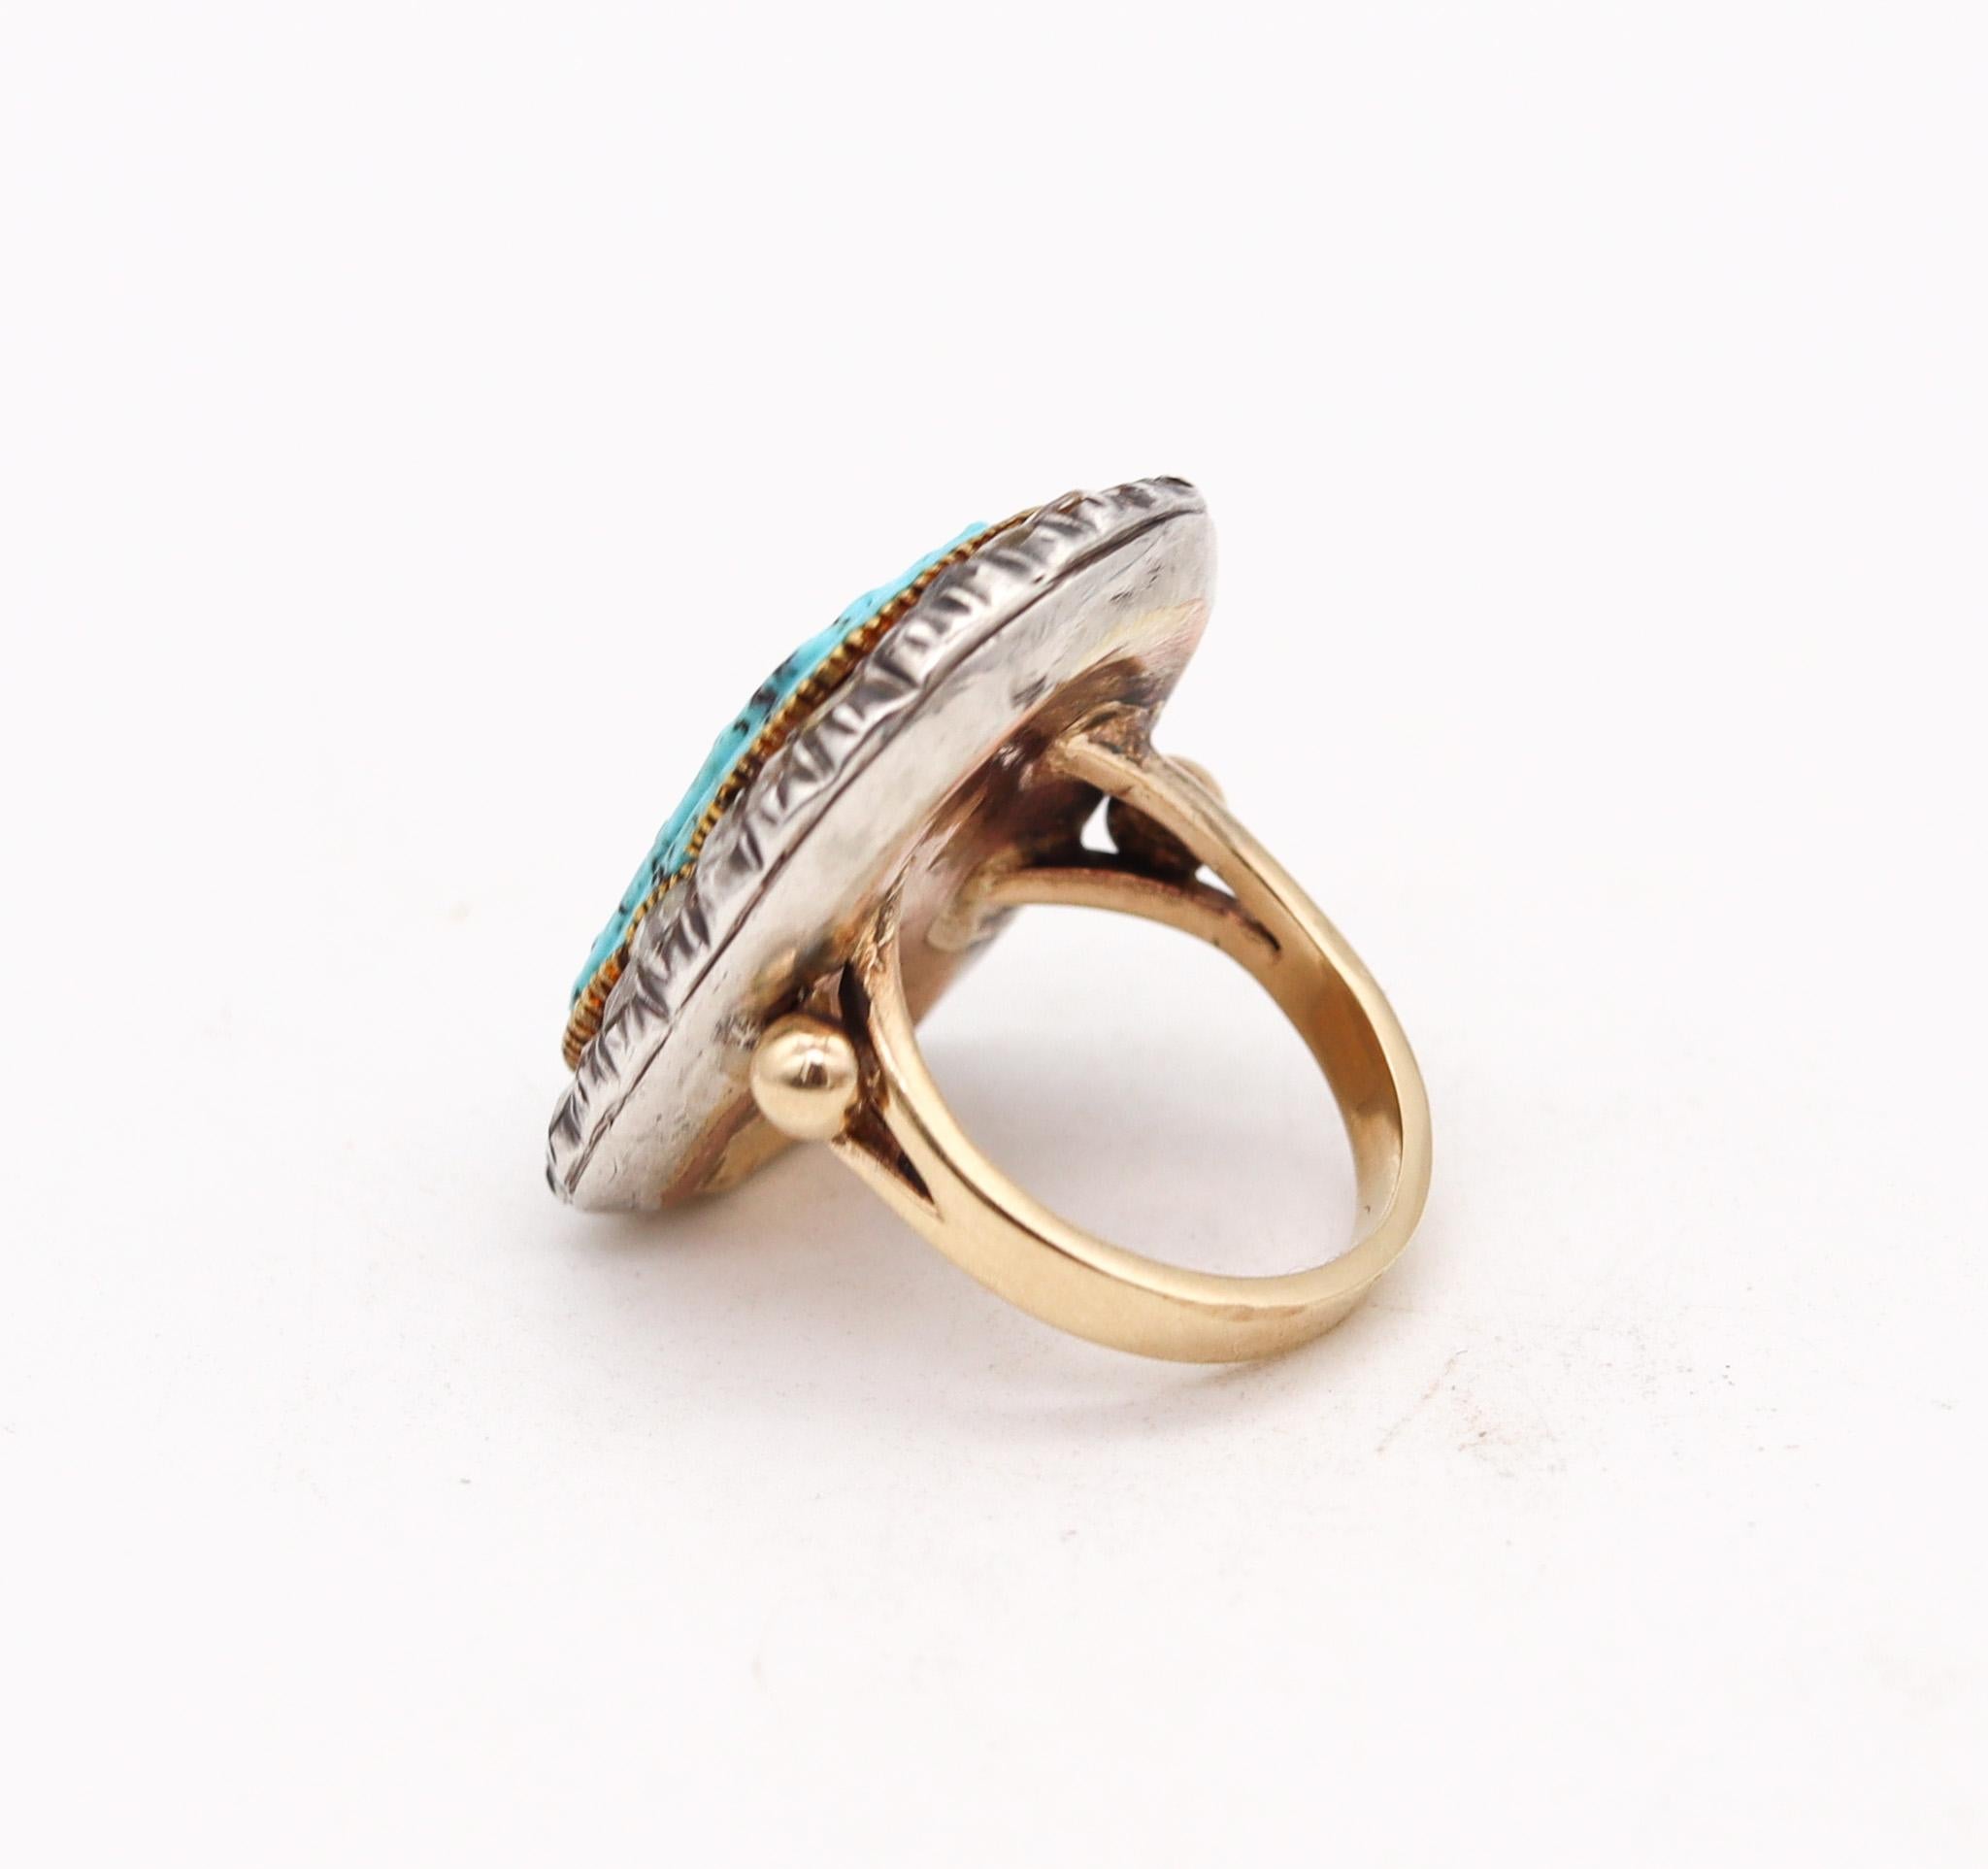 English Georgian 1780 Ring in 14 Kt Gold and Silver with Diamonds and Turquoise In Good Condition For Sale In Miami, FL